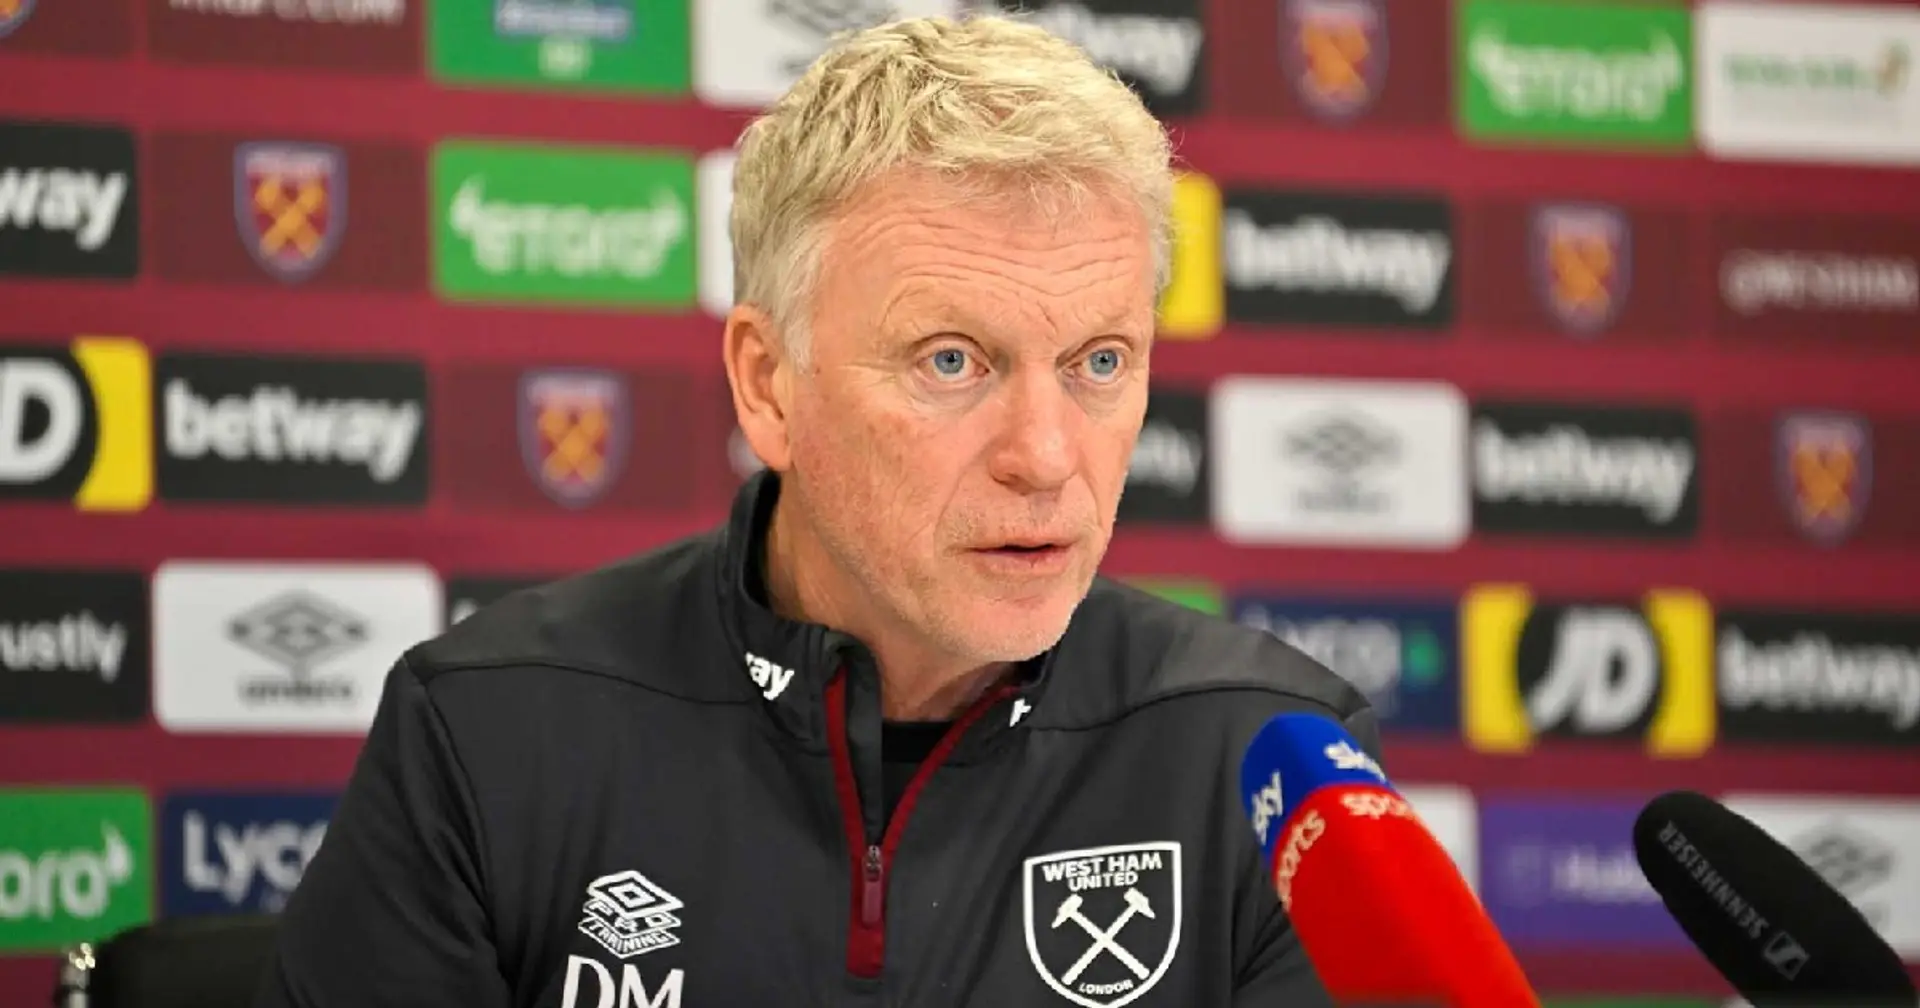 'It'll be fantastic': Moyes has just ONE target when Arsenal visit West Ham